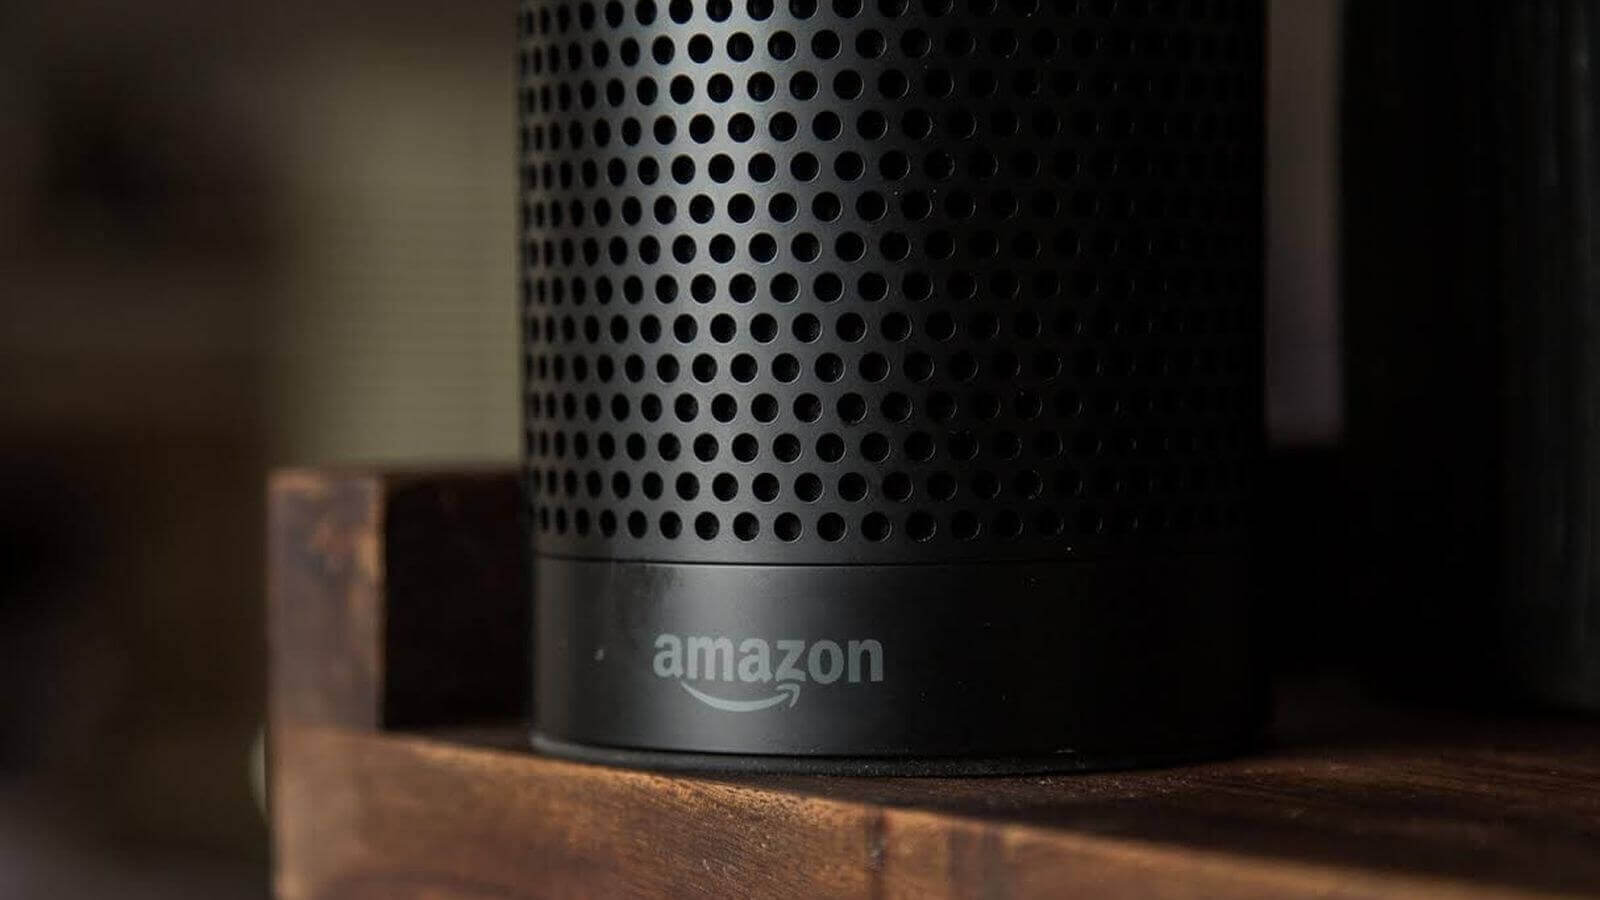 Amazon launches 'Alexa Answers,' letting select customers answer questions for the AI